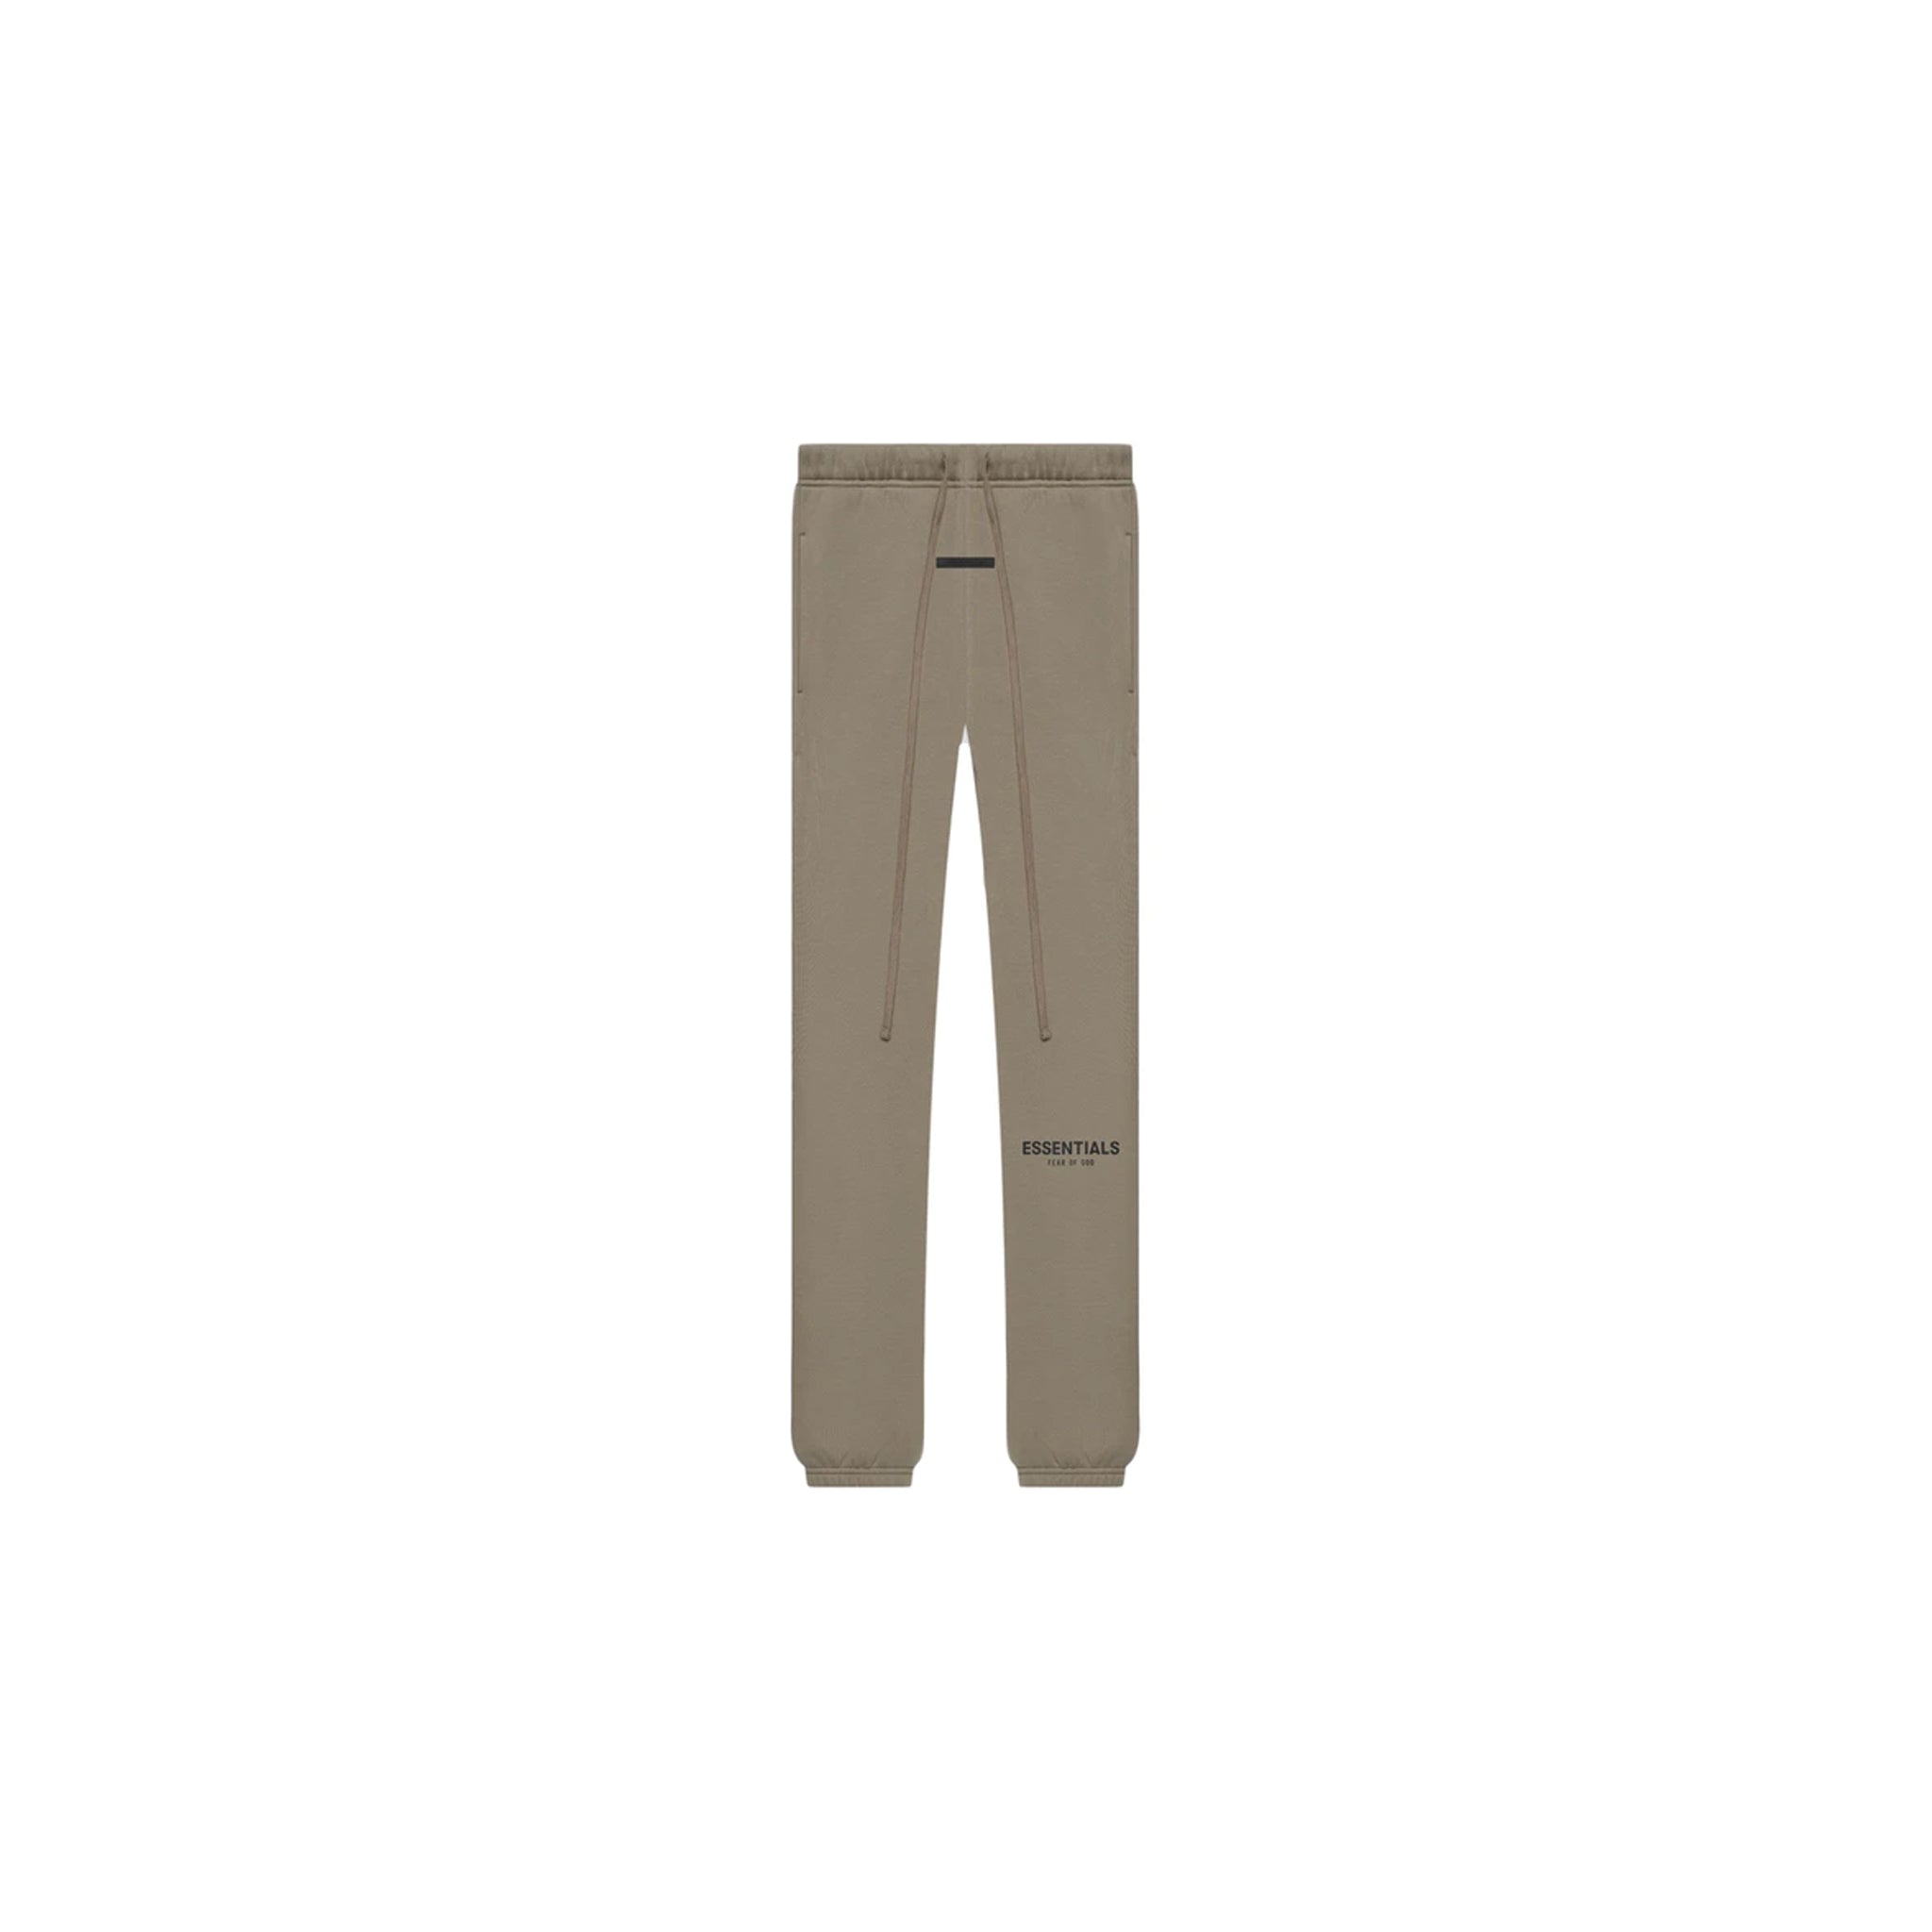 FEAR OF GOD ESSENTIALS SWEATPANTS TAUPE (SS21)